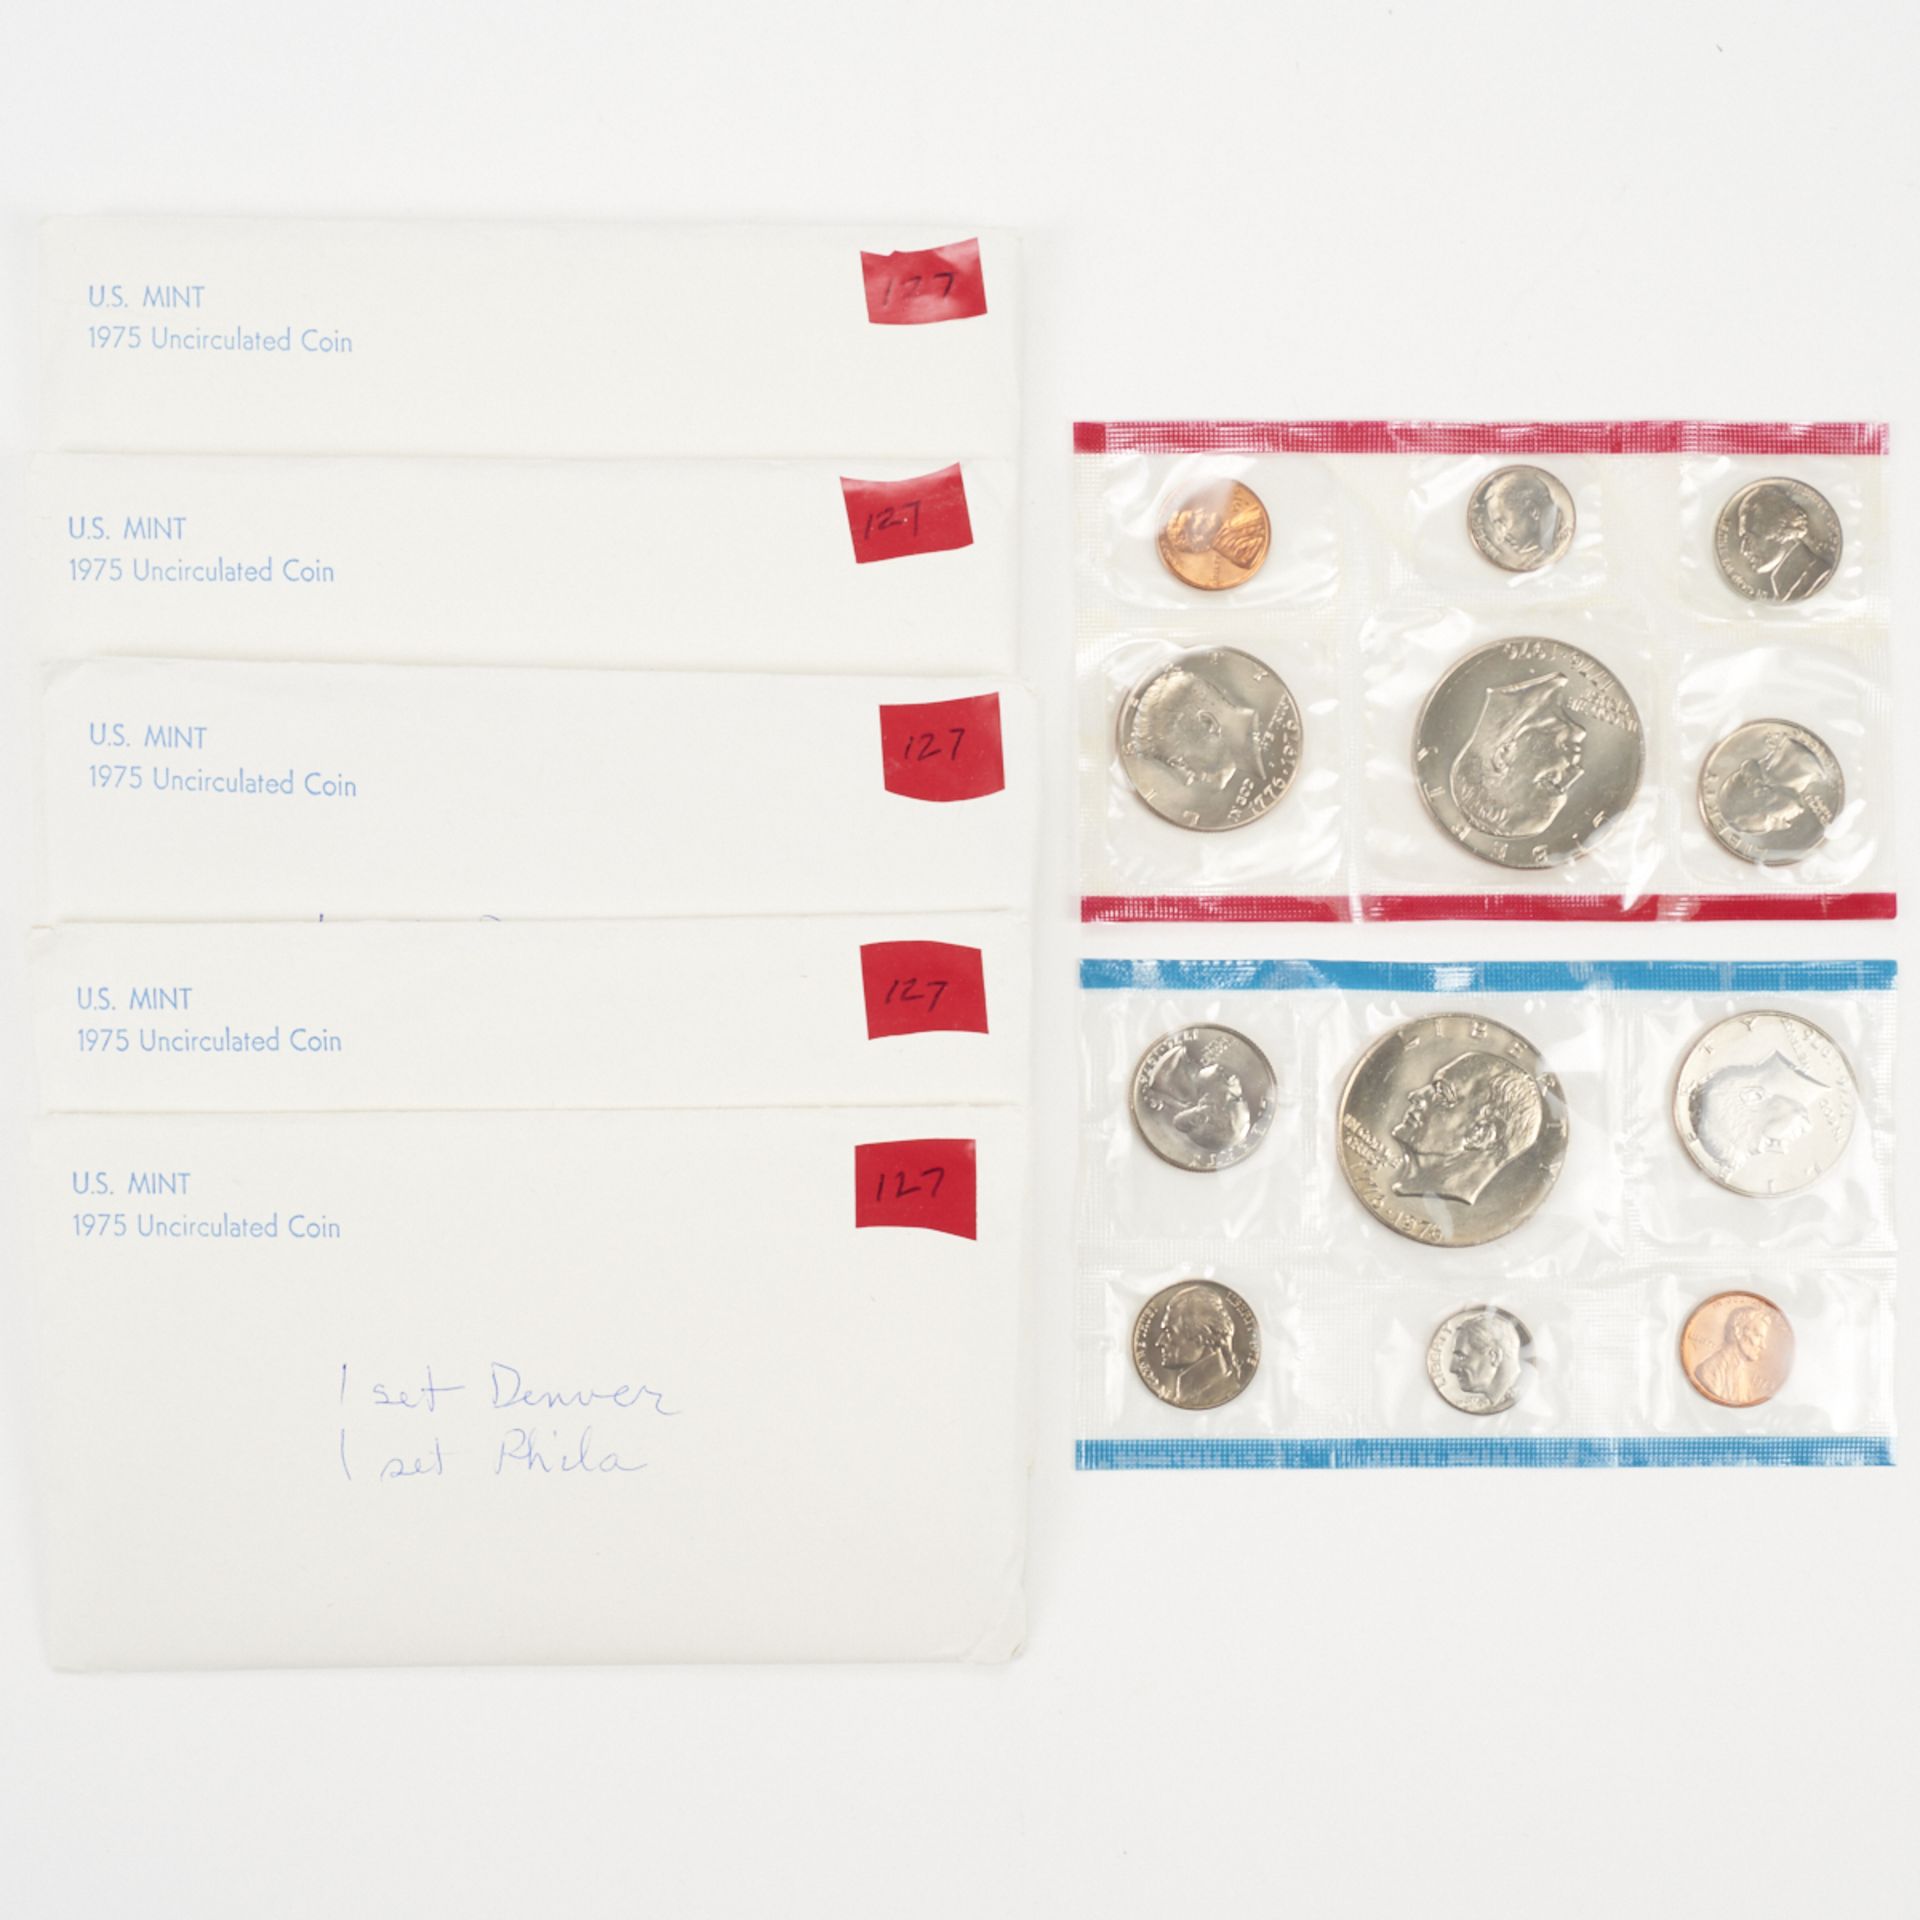 Lrg Grp of Uncirculated Sets of Coins - Image 7 of 10